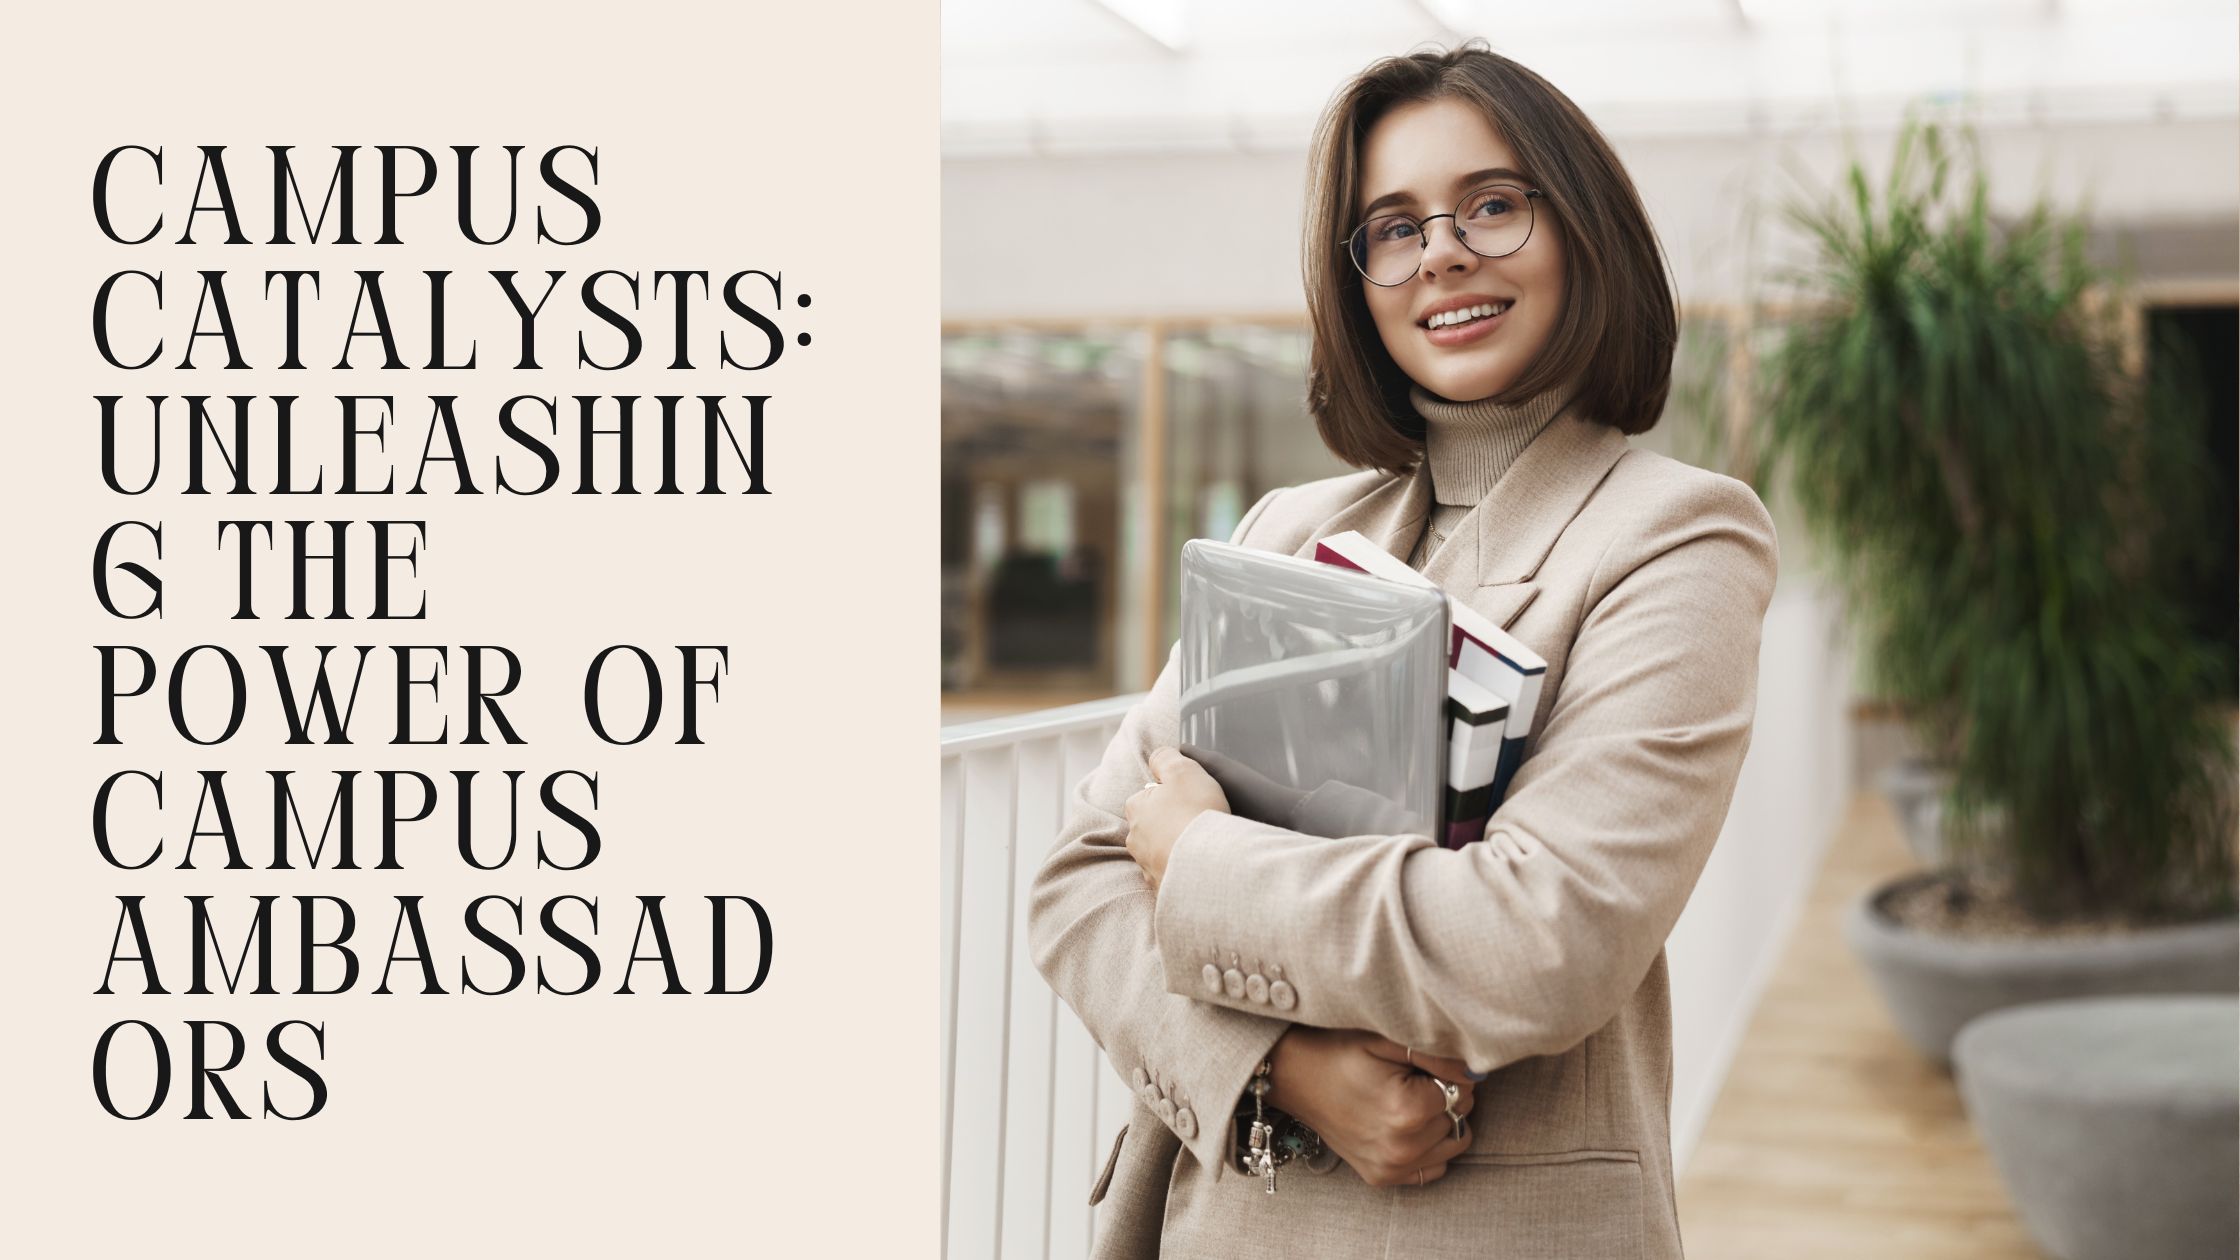 Campus Catalysts: Unleashing the Power of Campus Ambassadors